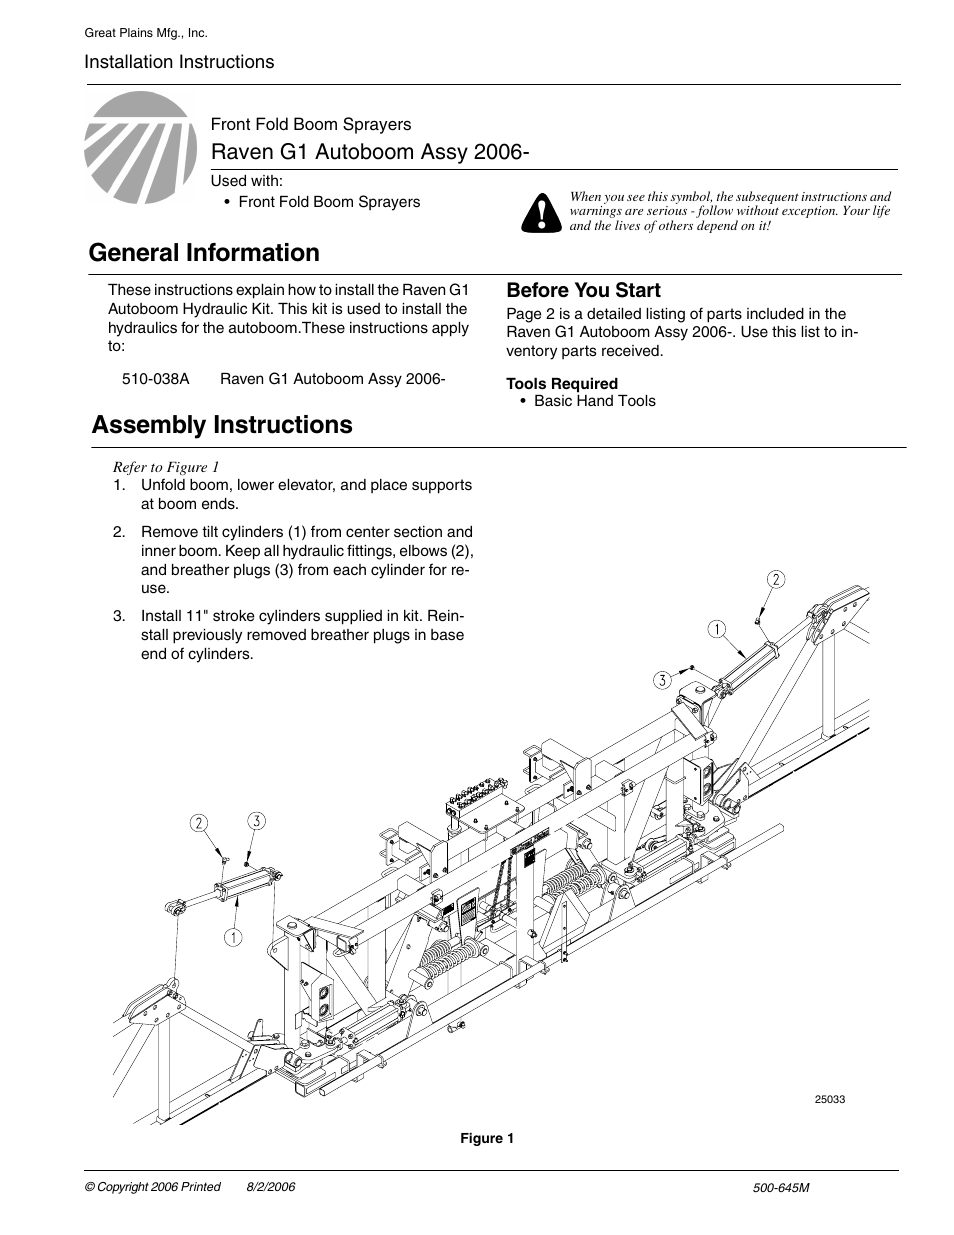 Great Plains Raven G1 Autoboom Assy User Manual | 2 pages